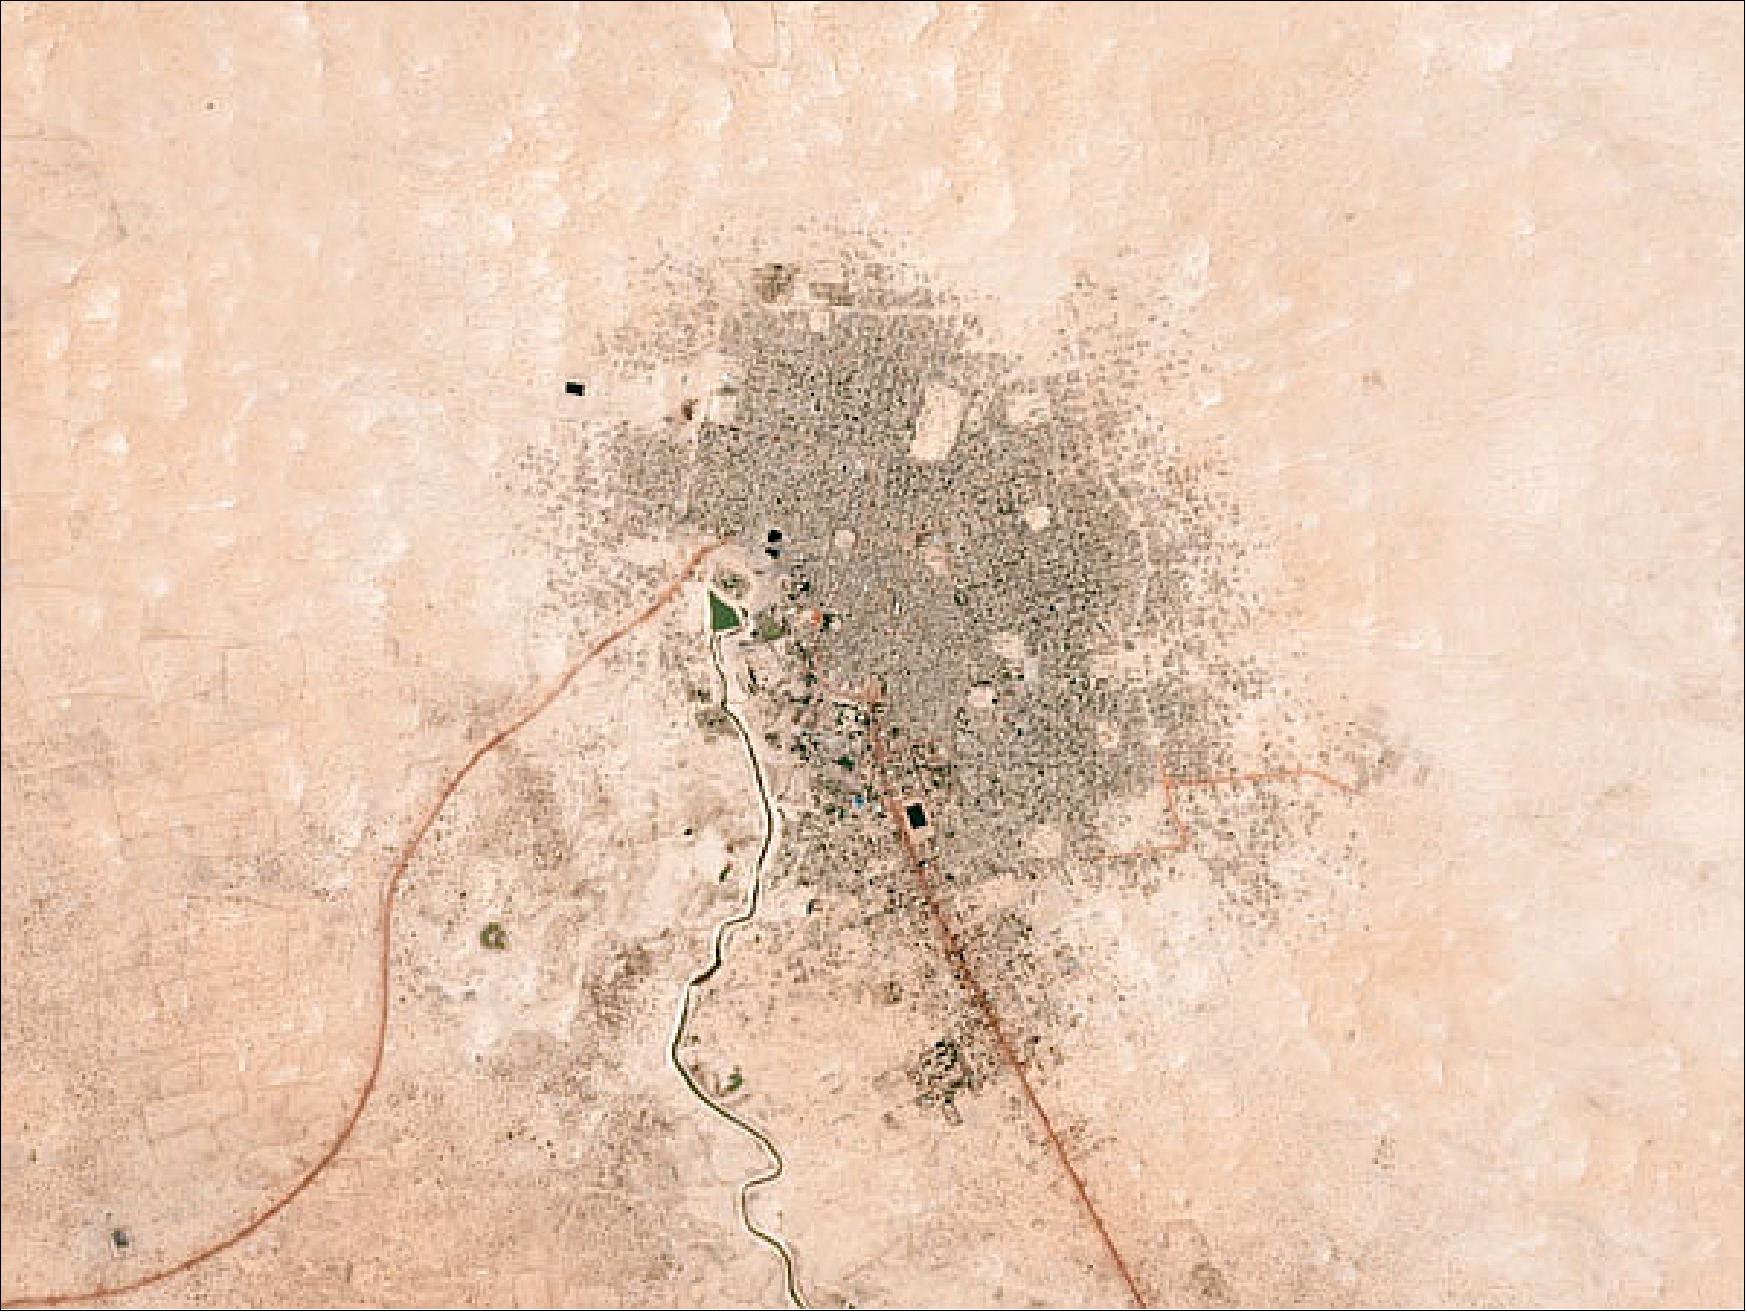 Figure 34: The Flock constellation acquired this view of the famous city of Timbuktu on March 5, 2017 (image credit: Planet)